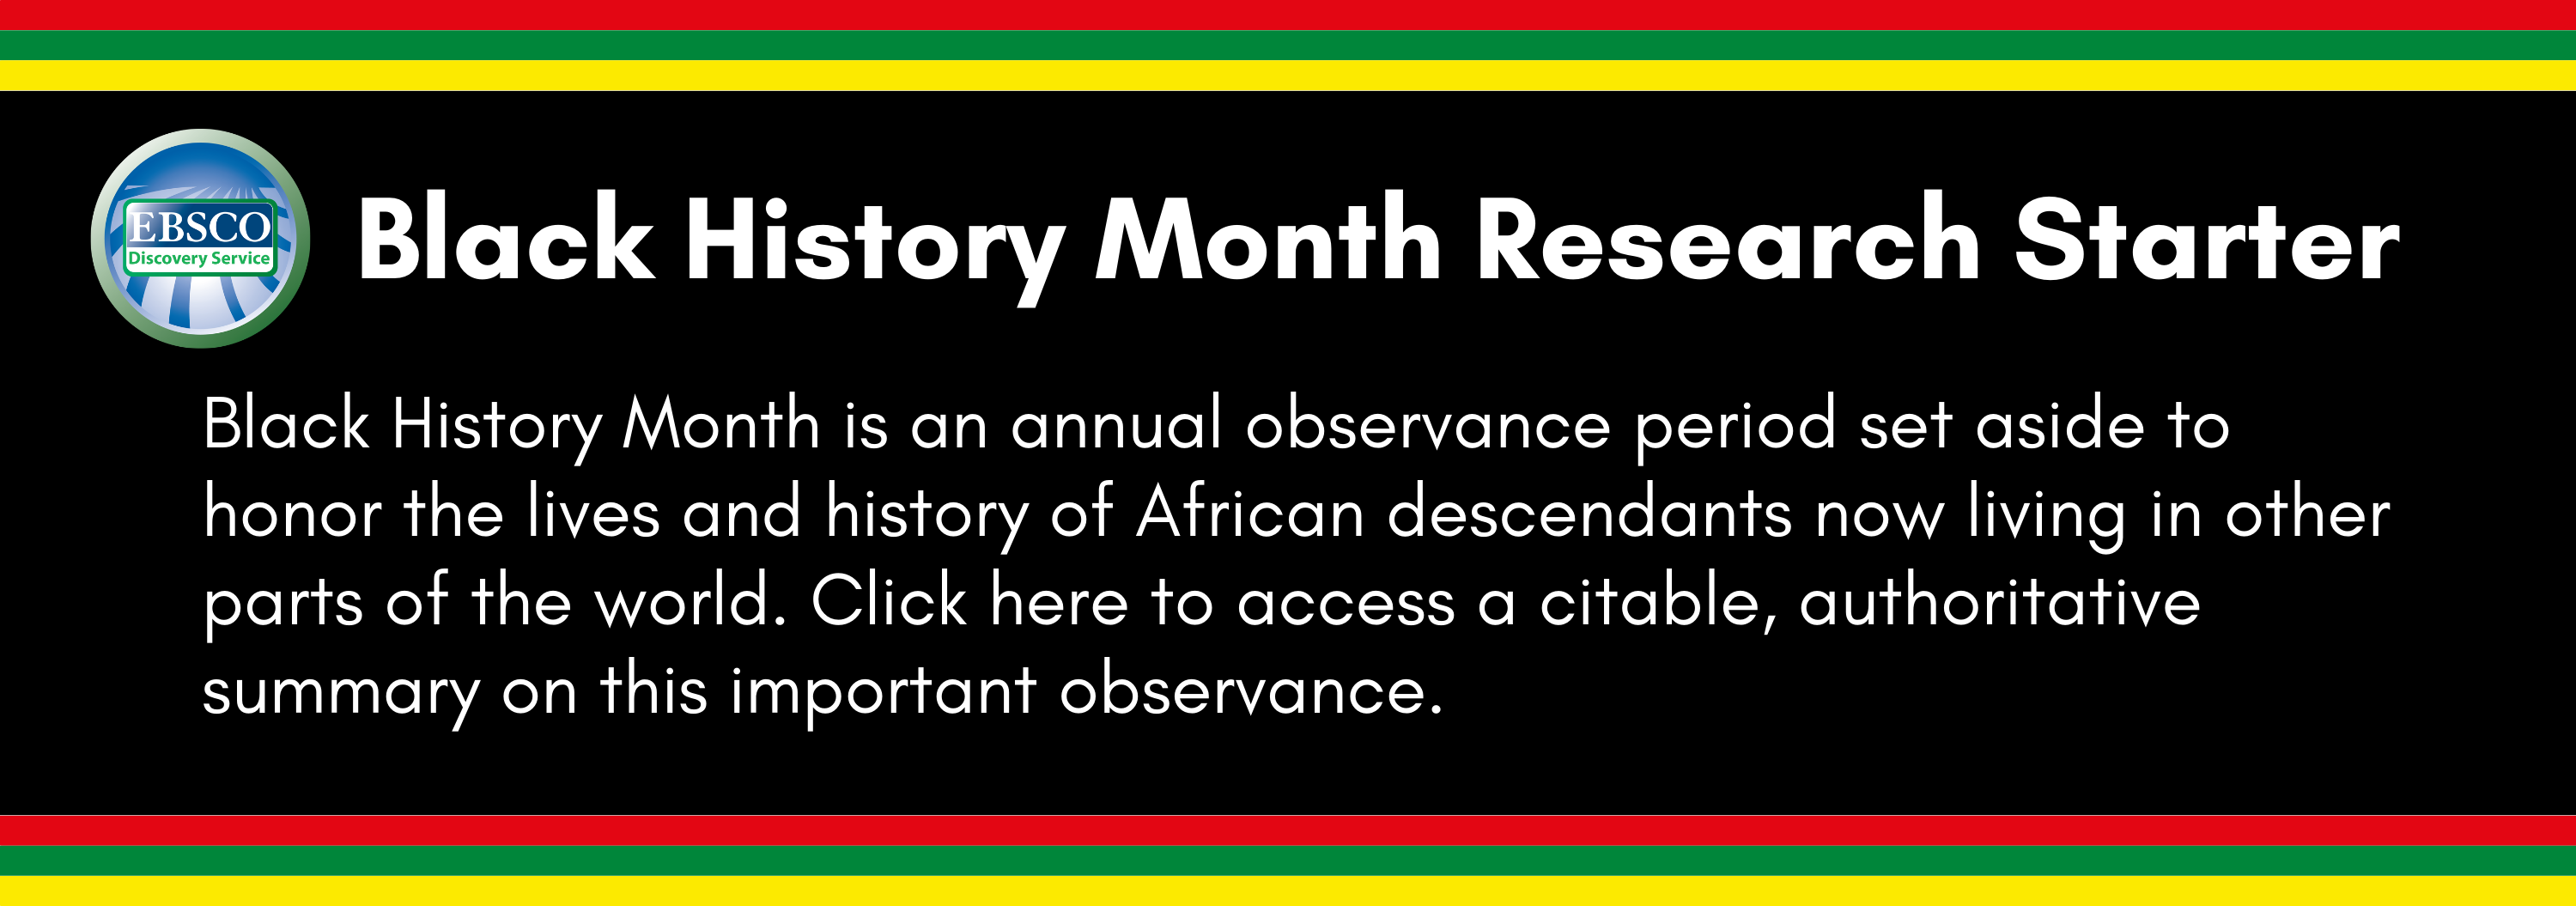 Black History Month Research Starter